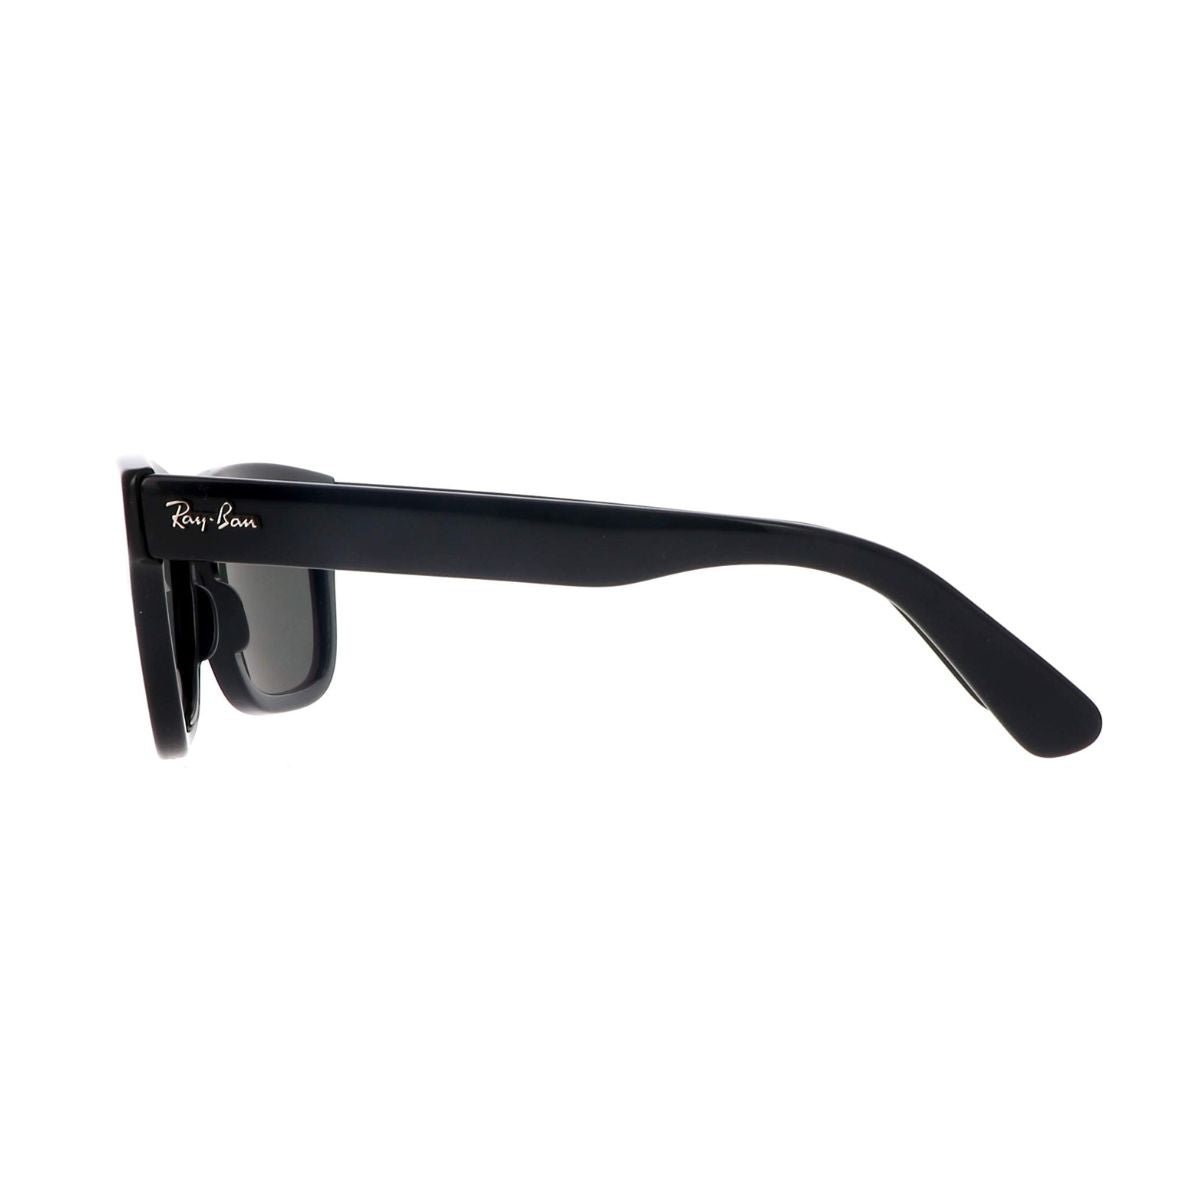 "Best Rayban 2283 901/58 Square Sunglass For Men's At Optorium"